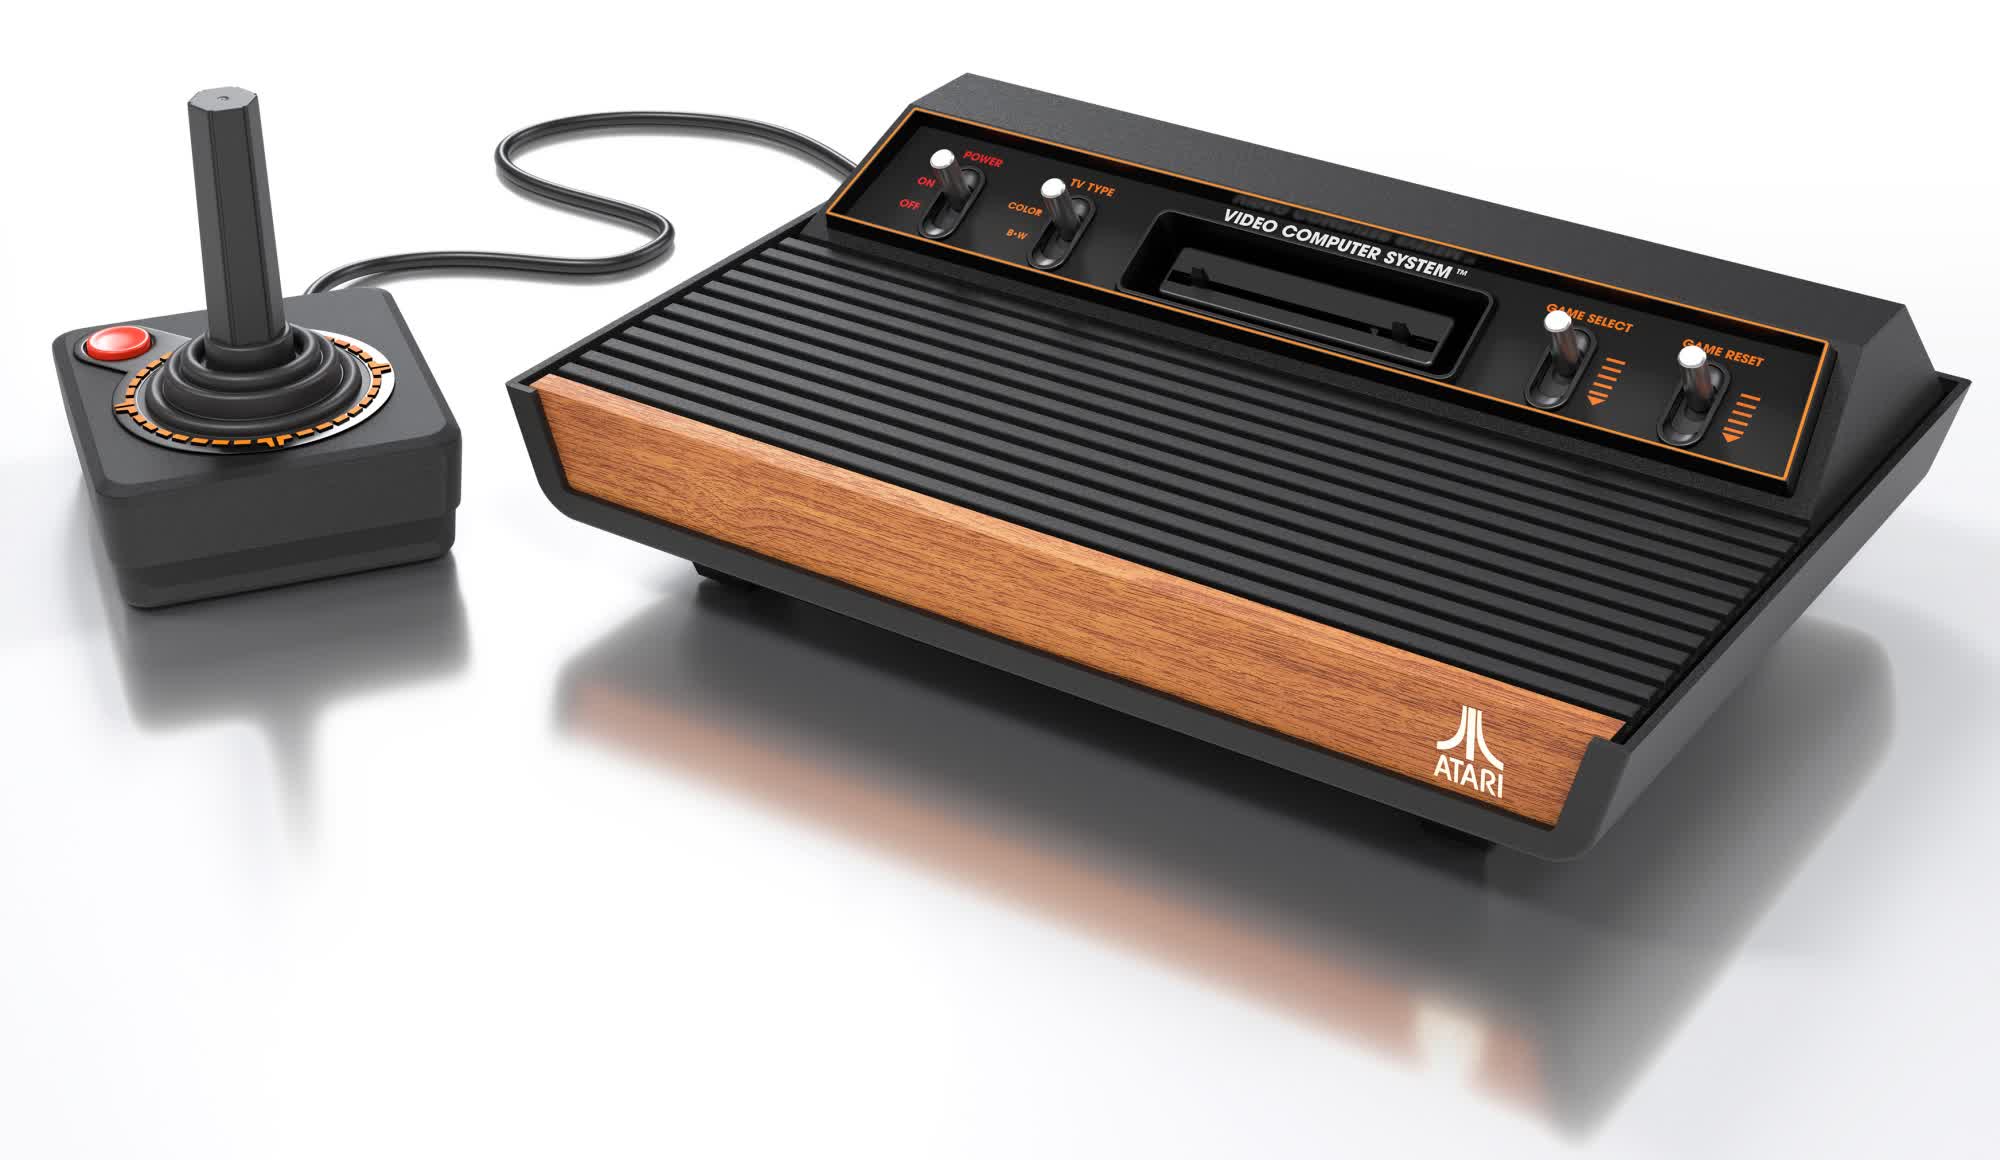 Atari's 2600+ is a rebooted version of the original console that can play 2600 and 7800 carts